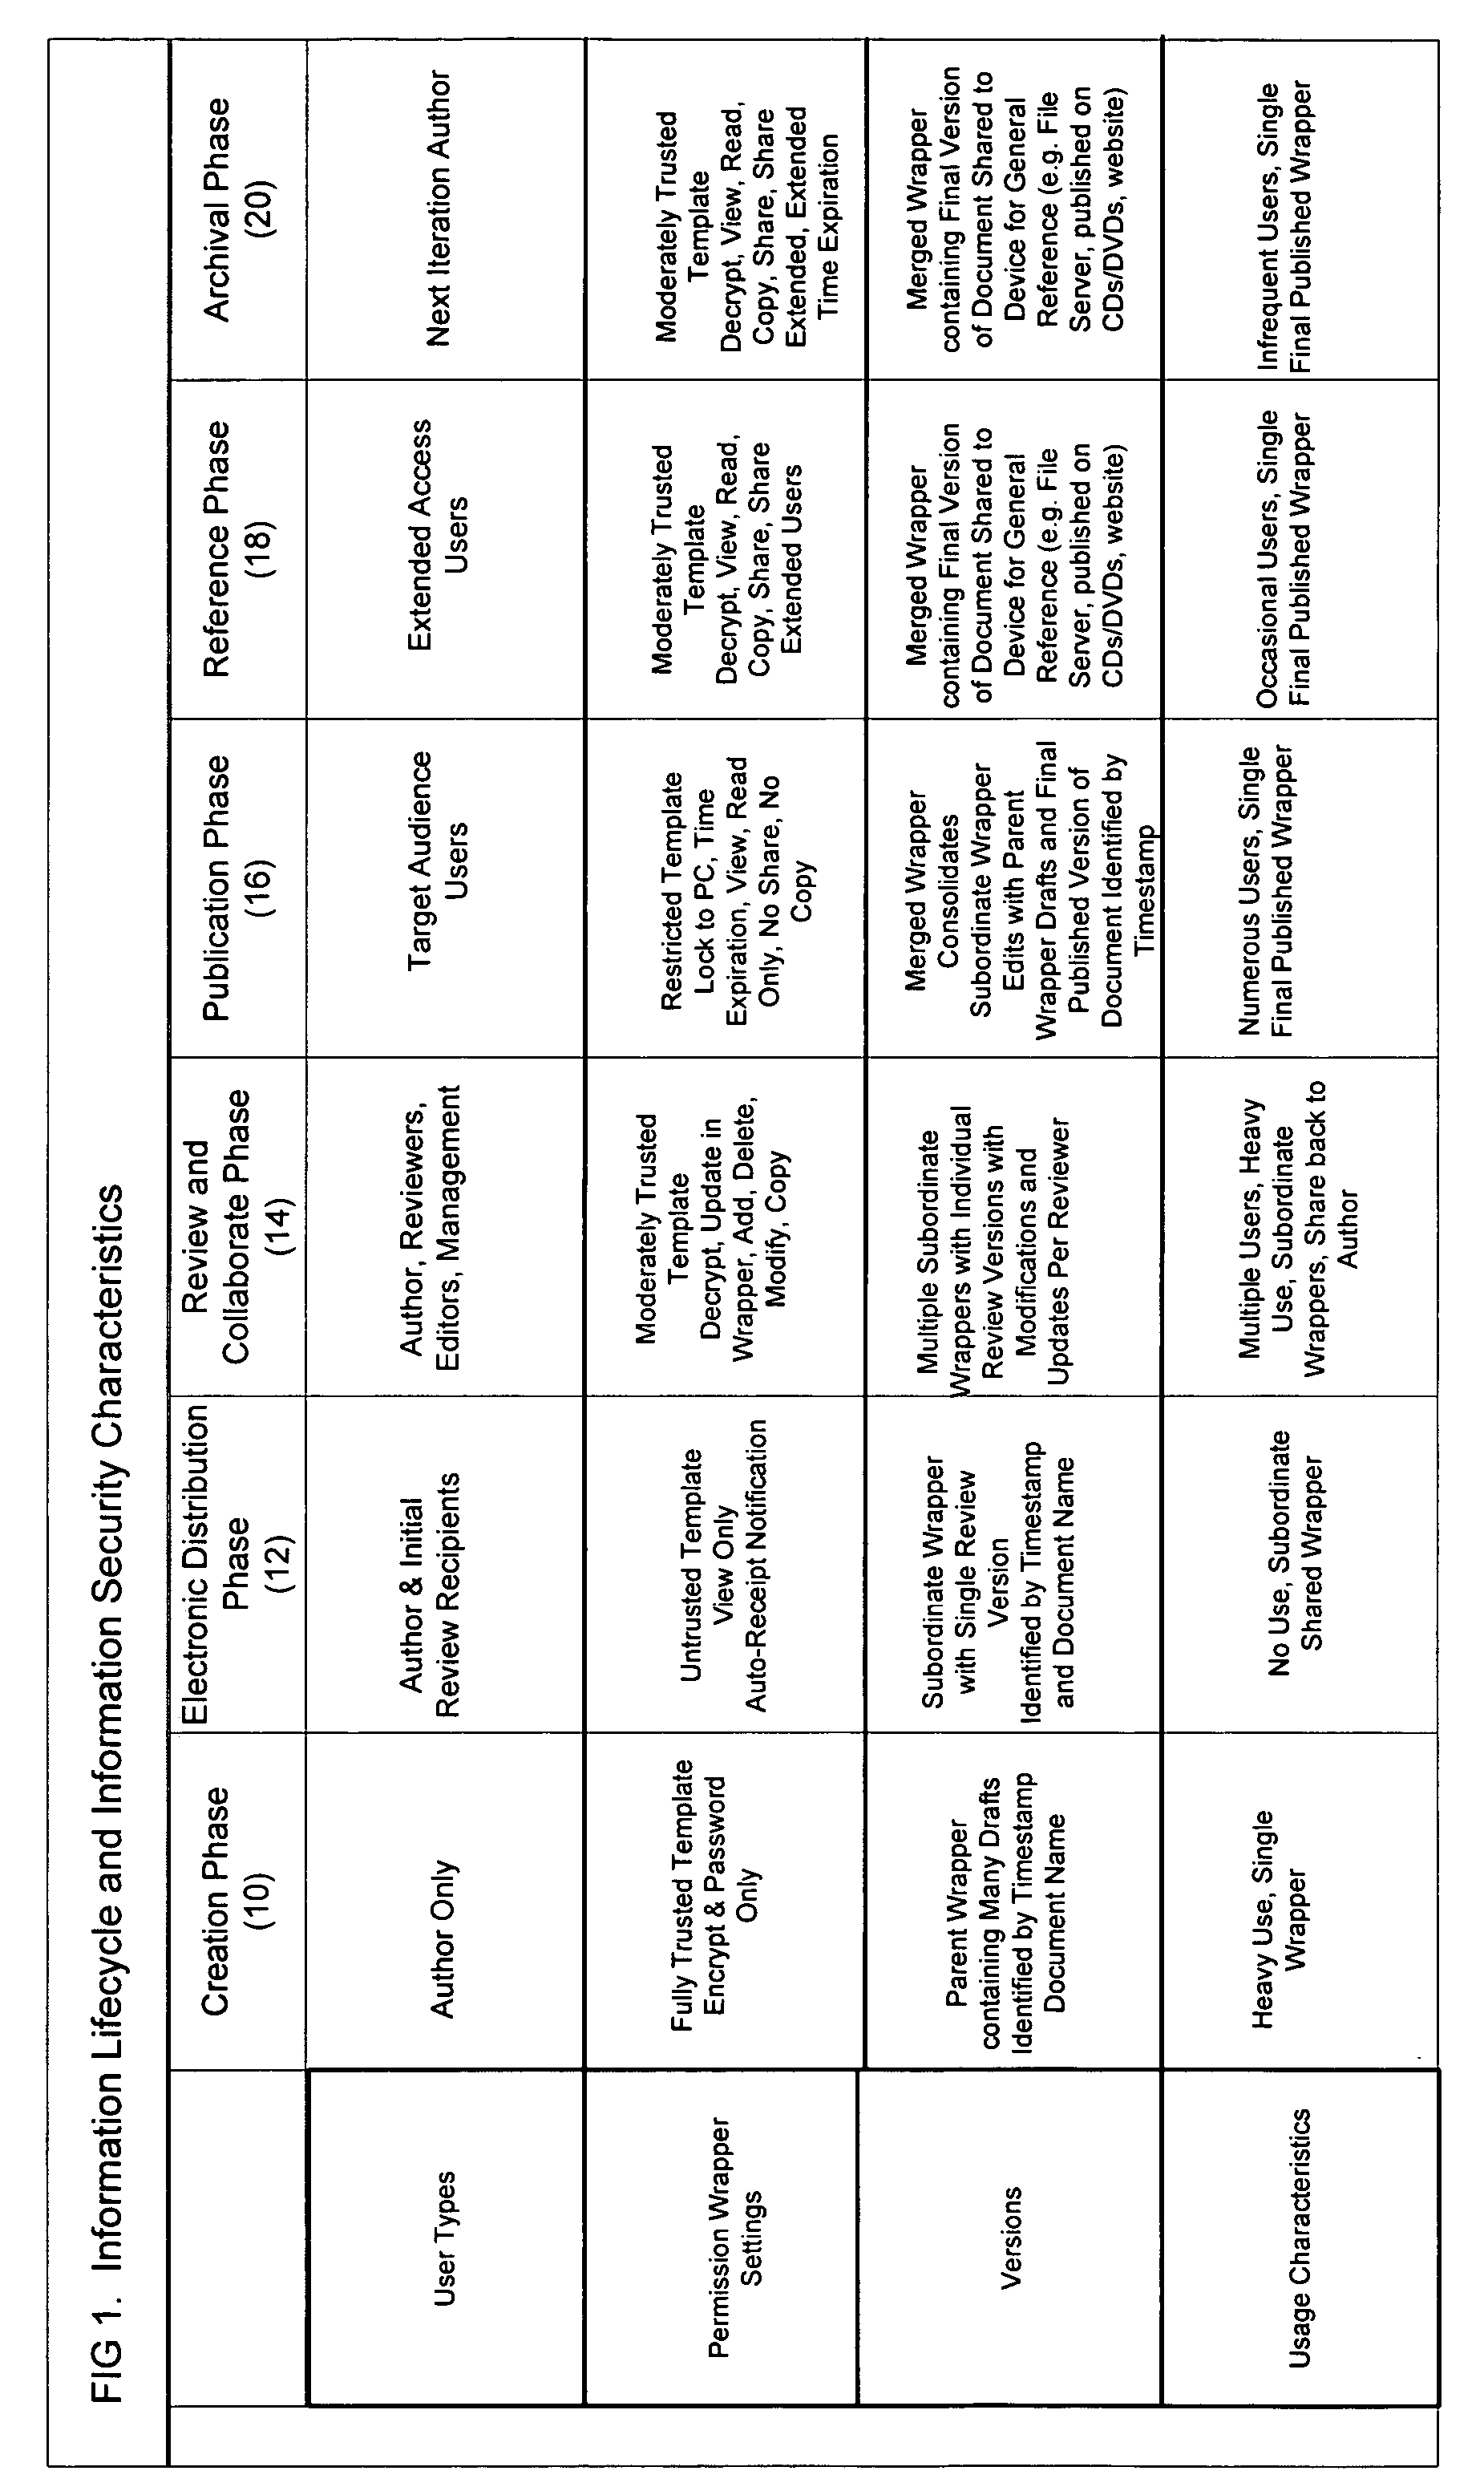 Method and apparatus for automatically detecting sensitive information, applying policies based on a structured taxonomy and dynamically enforcing and reporting on the protection of sensitive data through a software permission wrapper